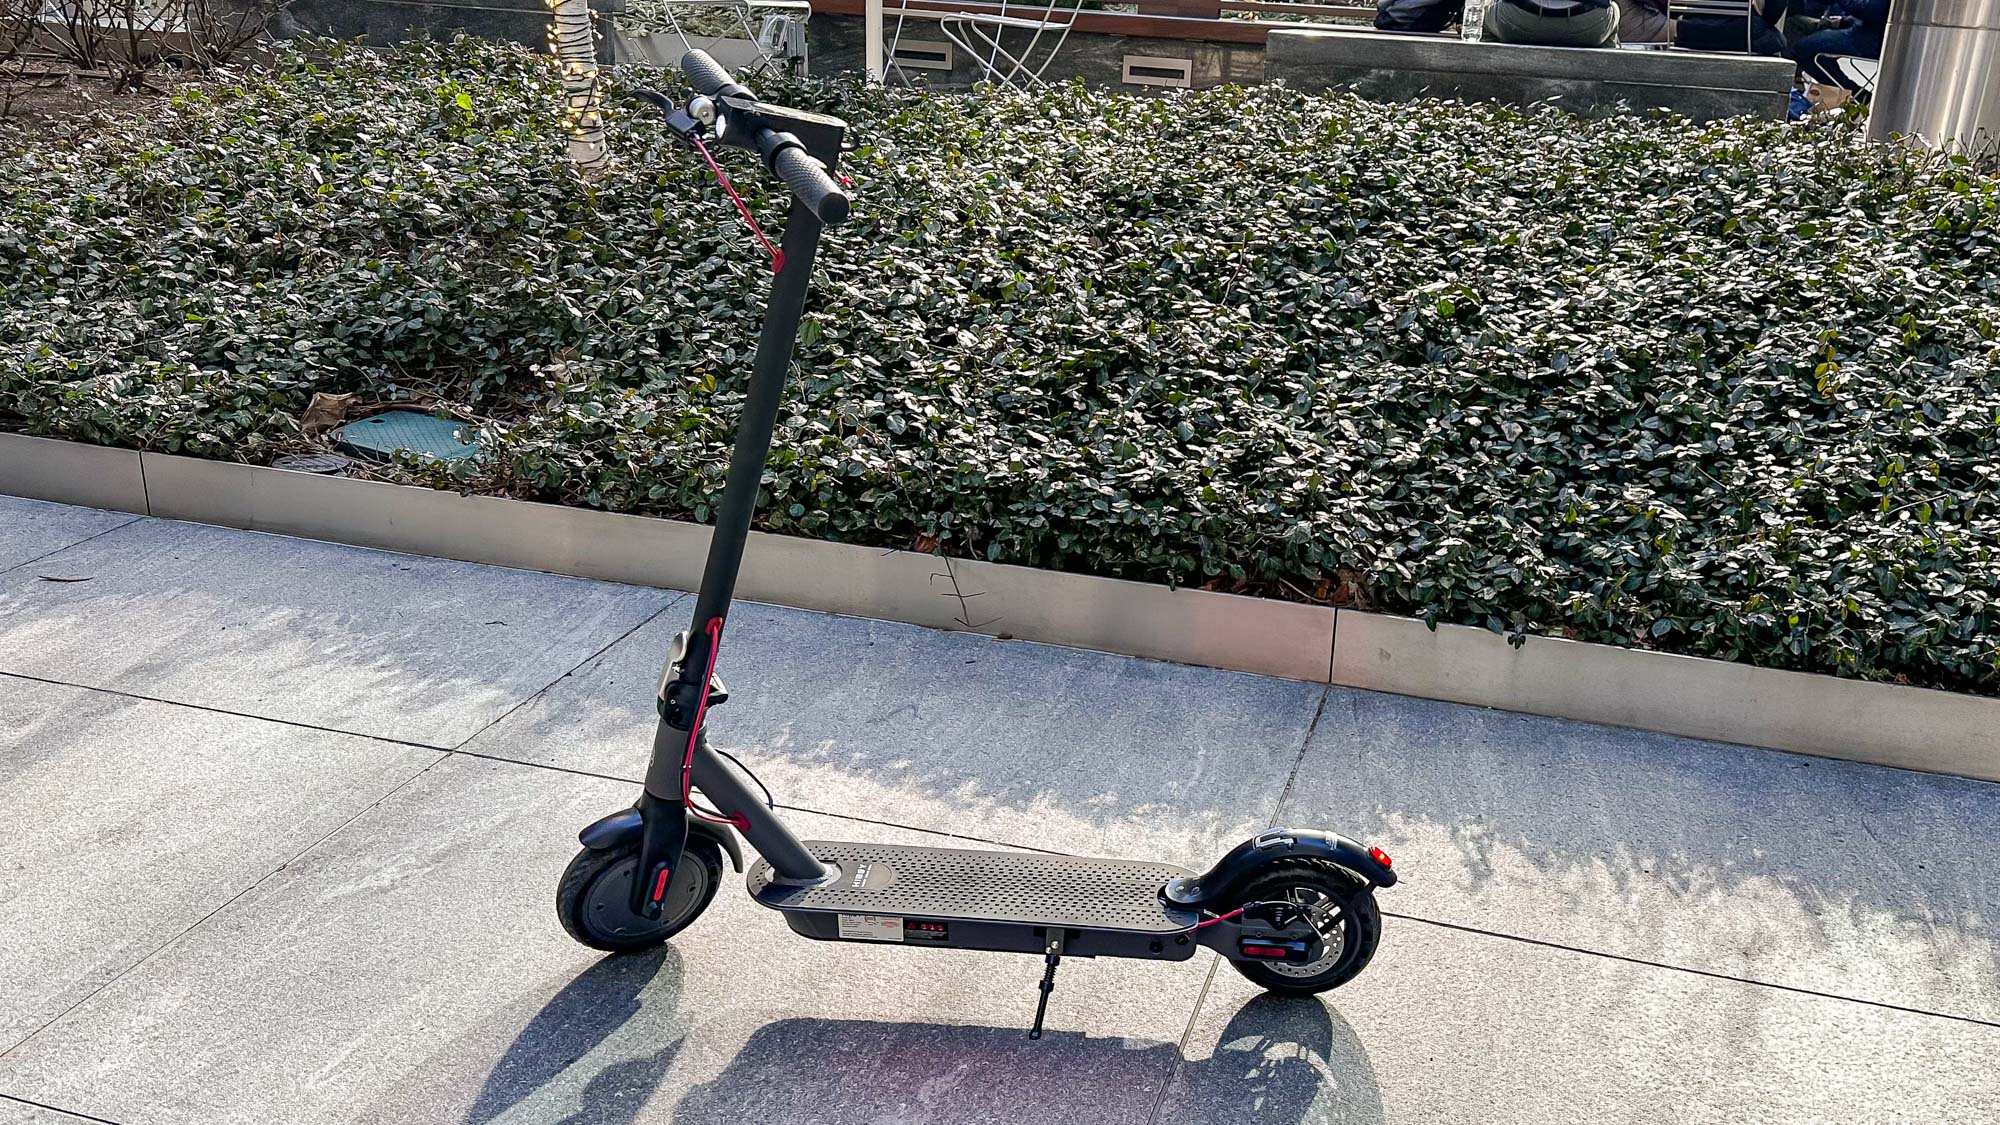 Hiboy S2 review: The best budget electric scooter